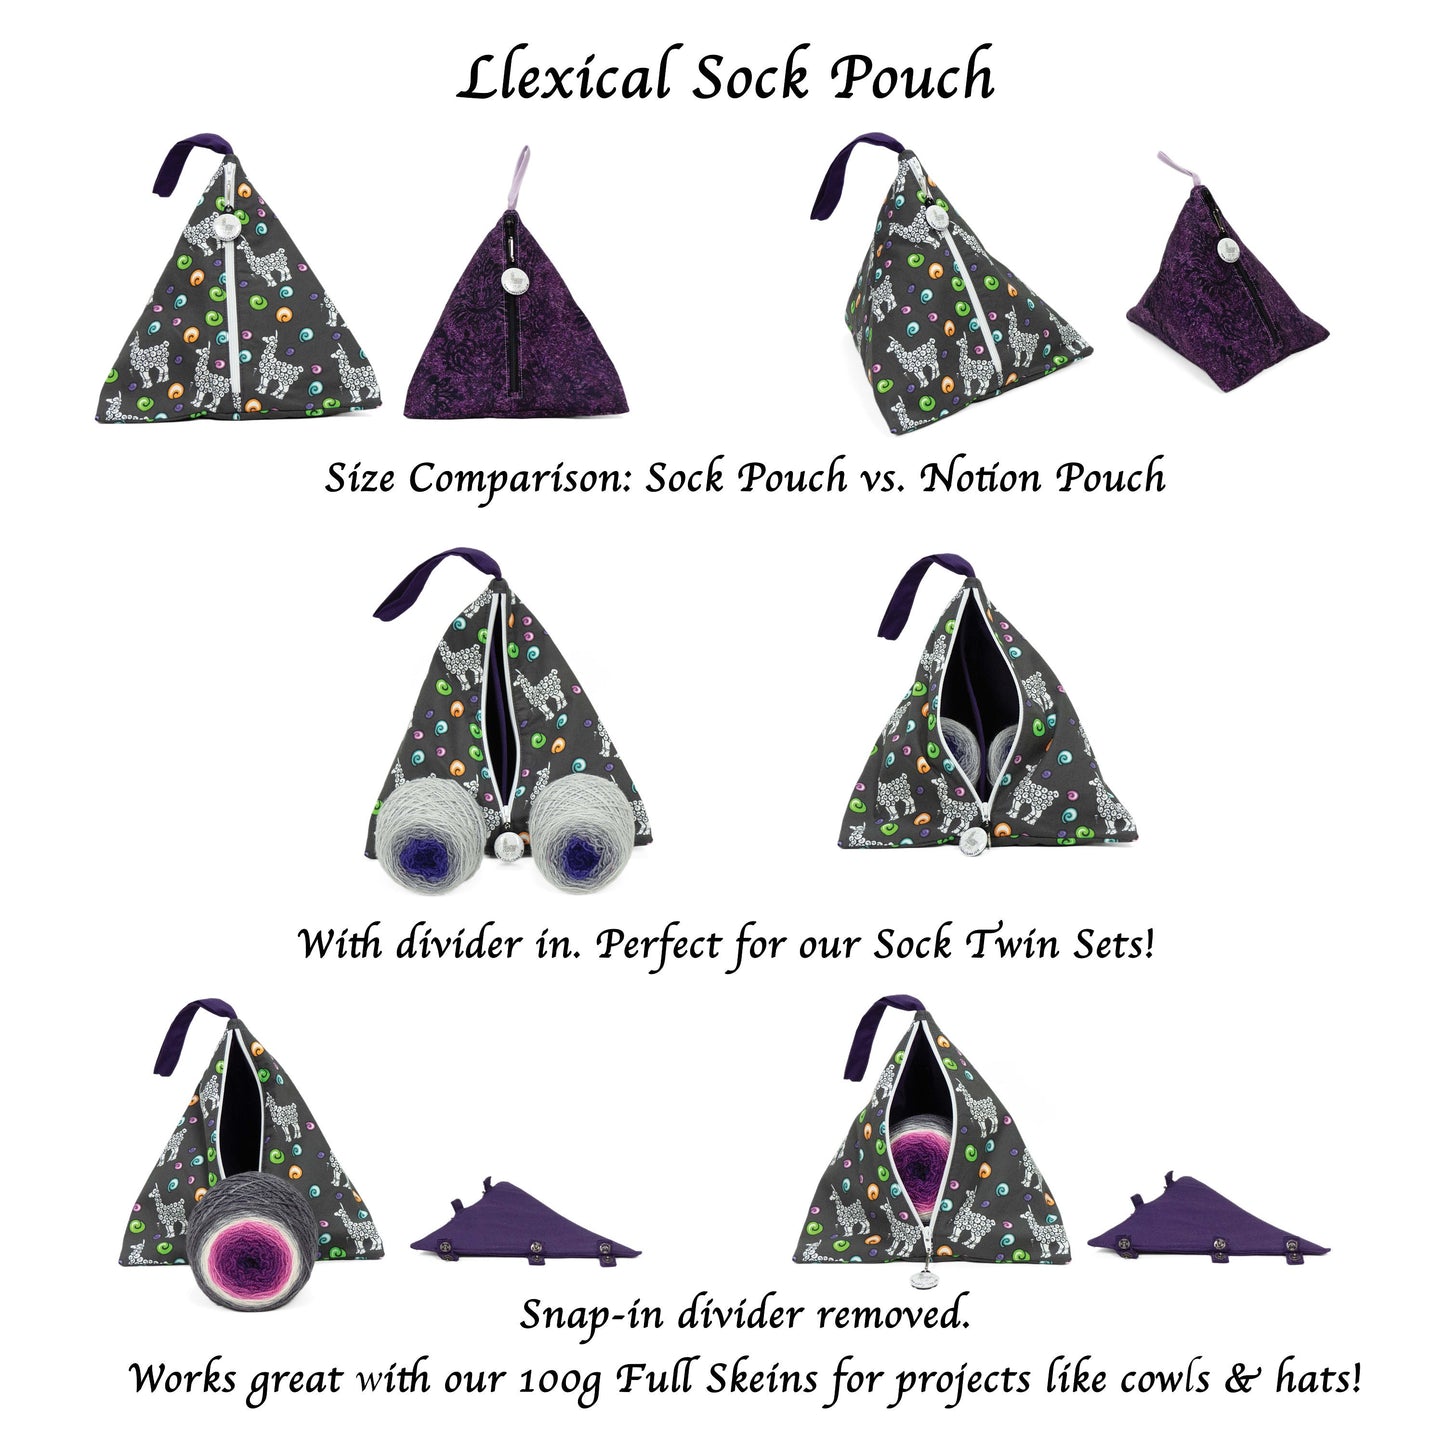 Metallic Medium Pebbles - Llexical Divided Sock Pouch - Knitting, Crochet, Spinning Project Bag